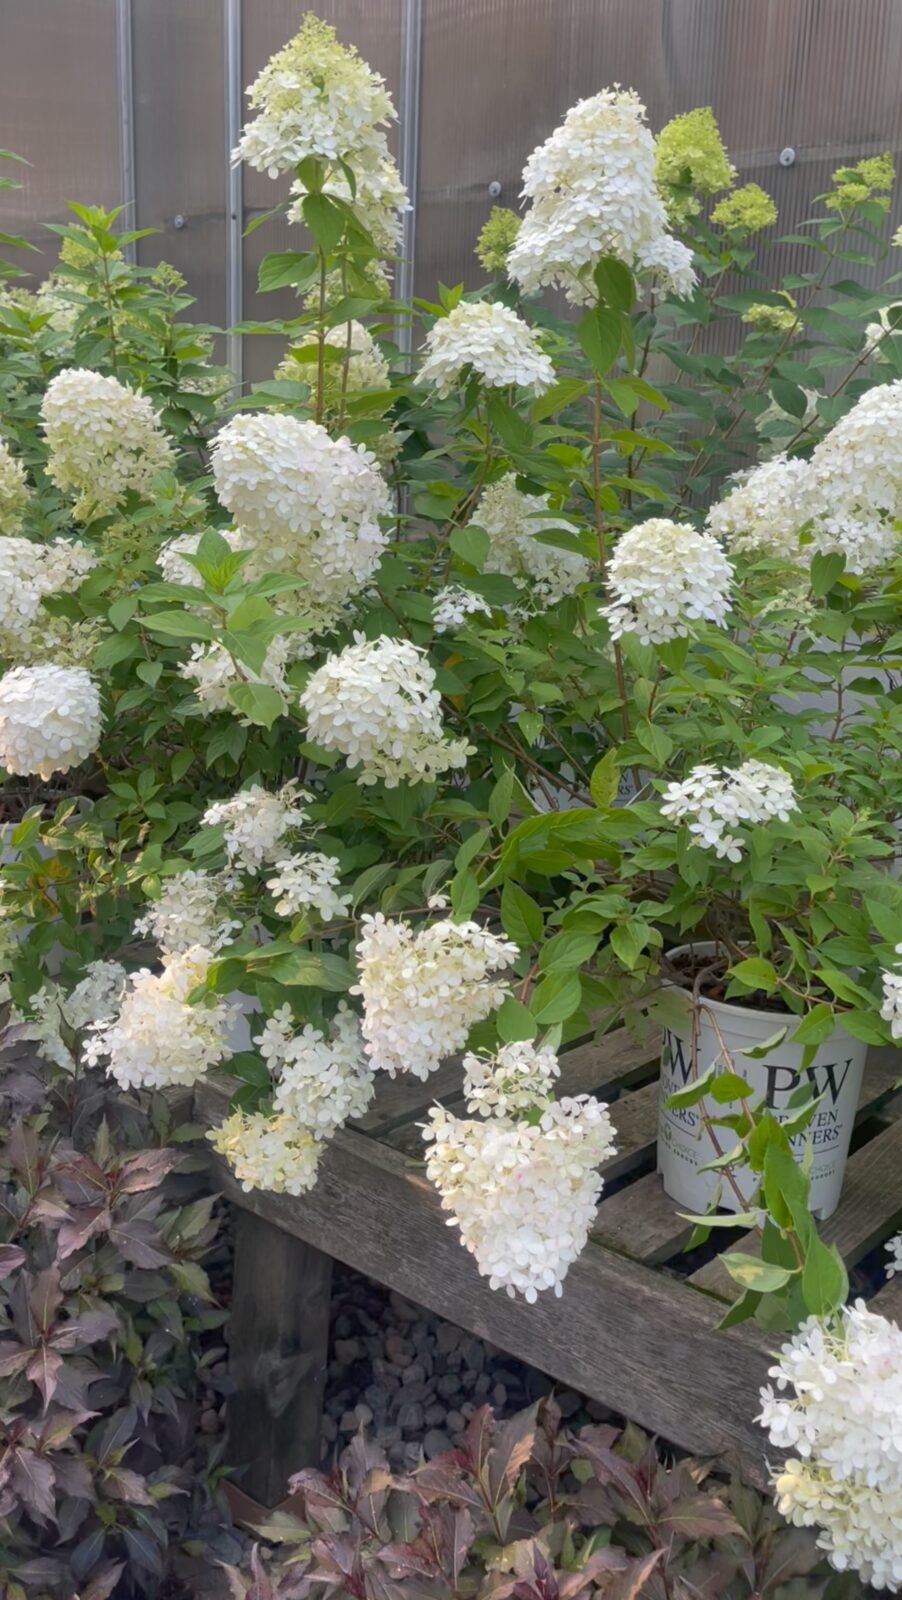 Containers of white hydrangeas in bloom